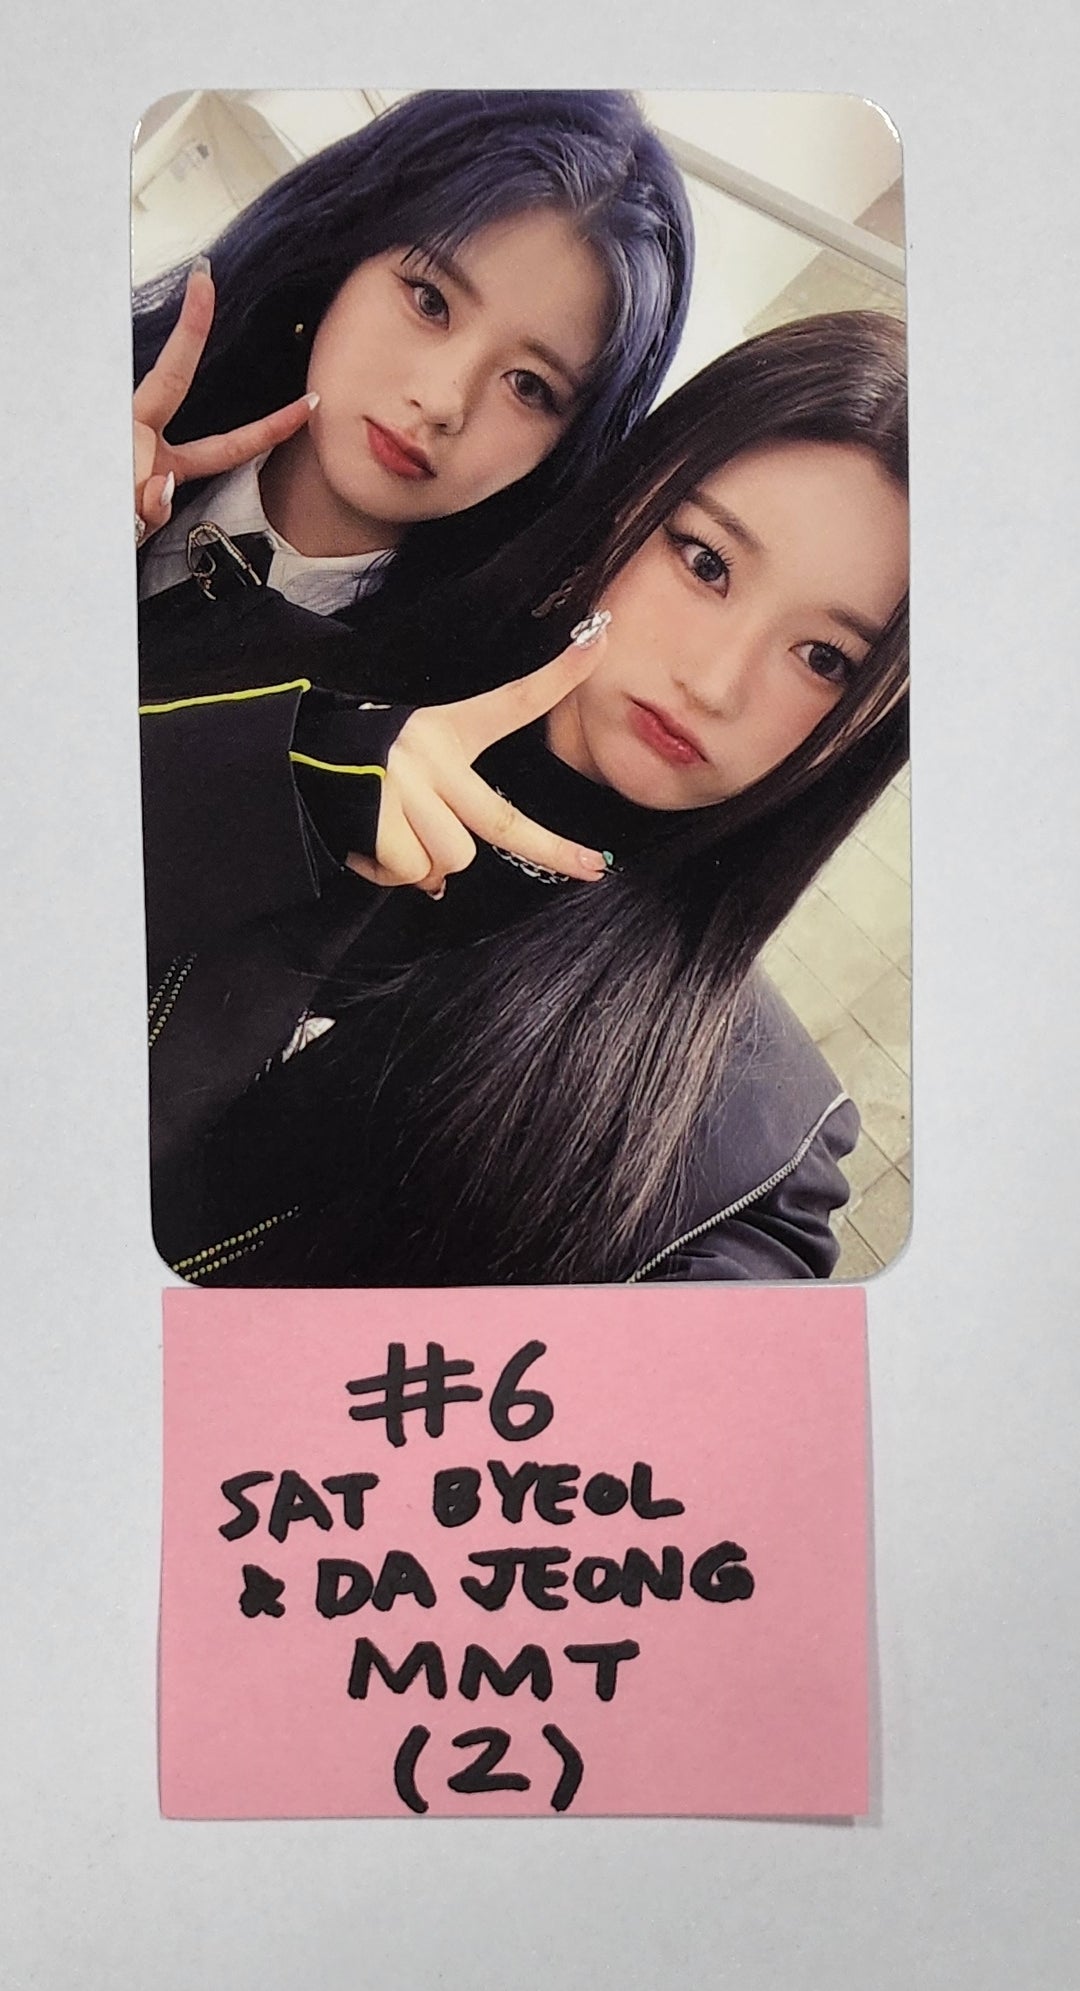 Pixy 'REBORN' - MMT Fansign Event Photocard